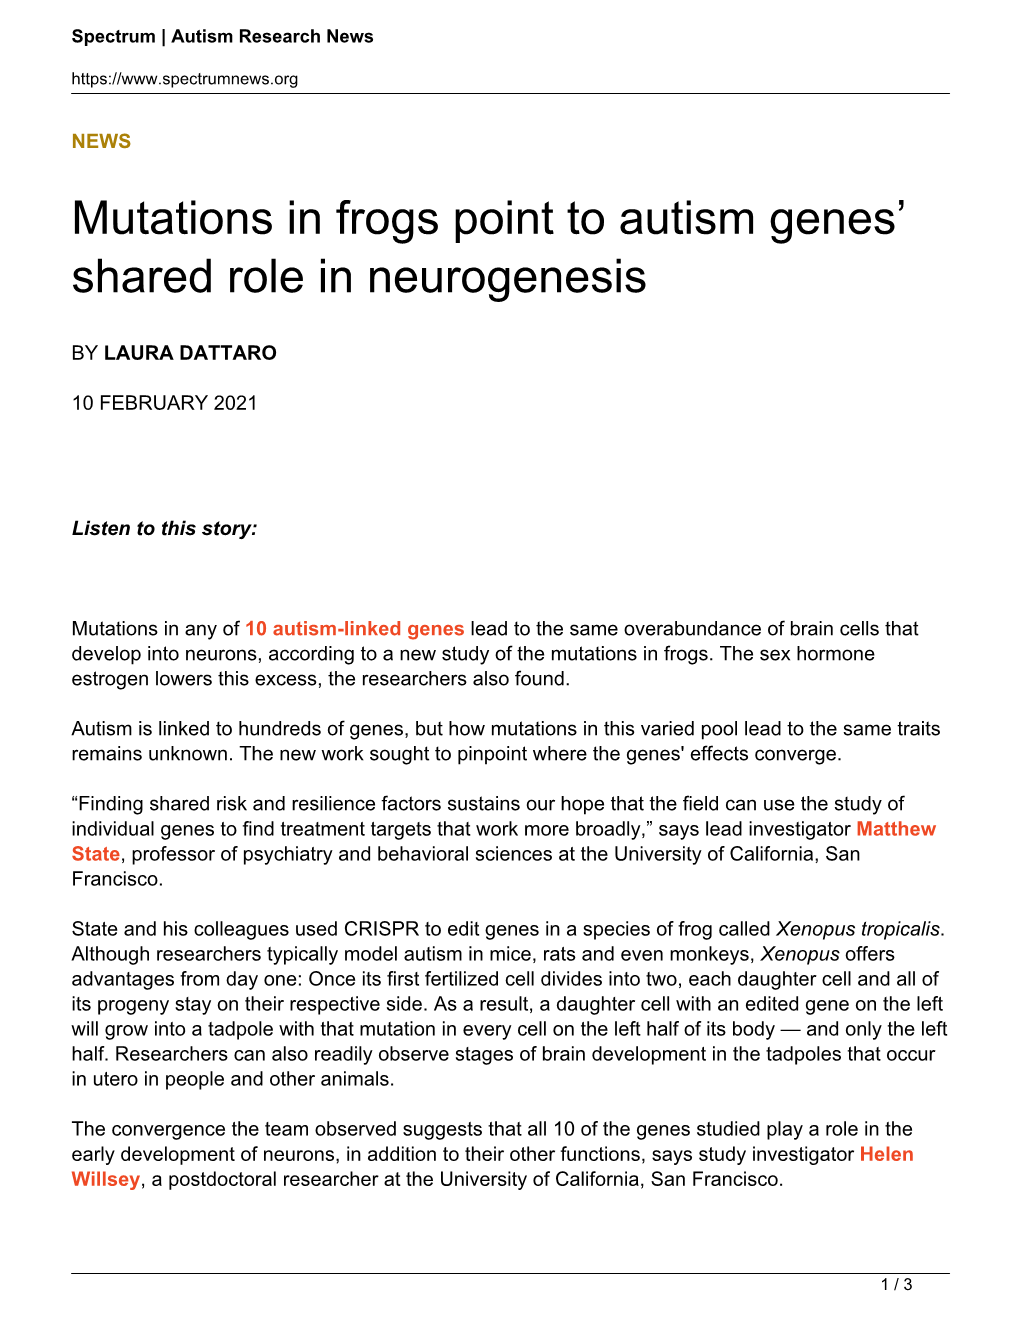 Mutations in Frogs Point to Autism Genes' Shared Role in Neurogenesis